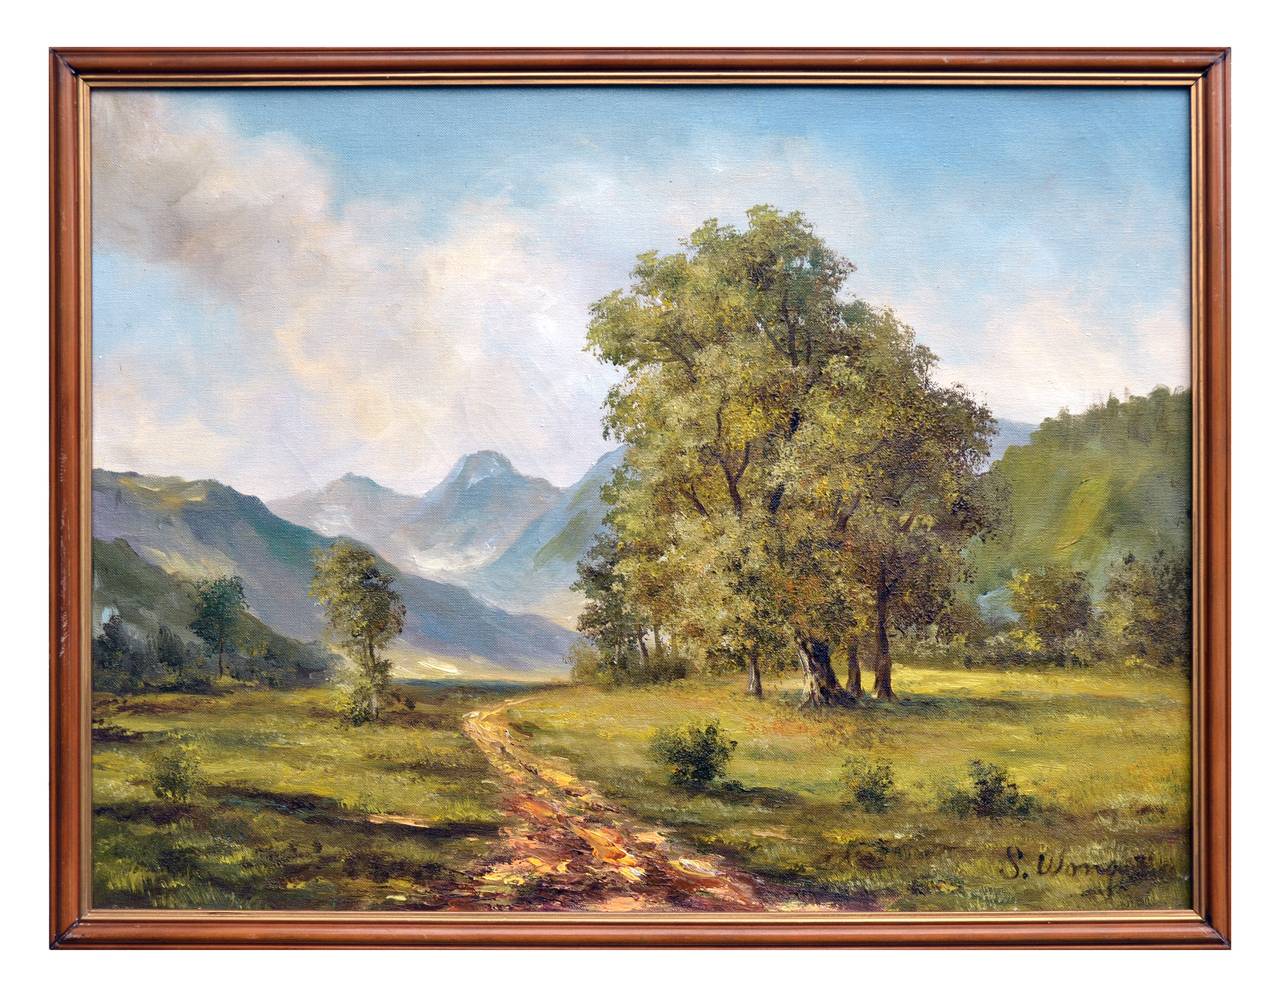 Picturesque Carmel Valley Sycamore Grove Park scene by 1940s San Francisco artist, S. Wong (American, 20th-century). Displayed in a giltwood frame. Image, 19"H x 25"W.